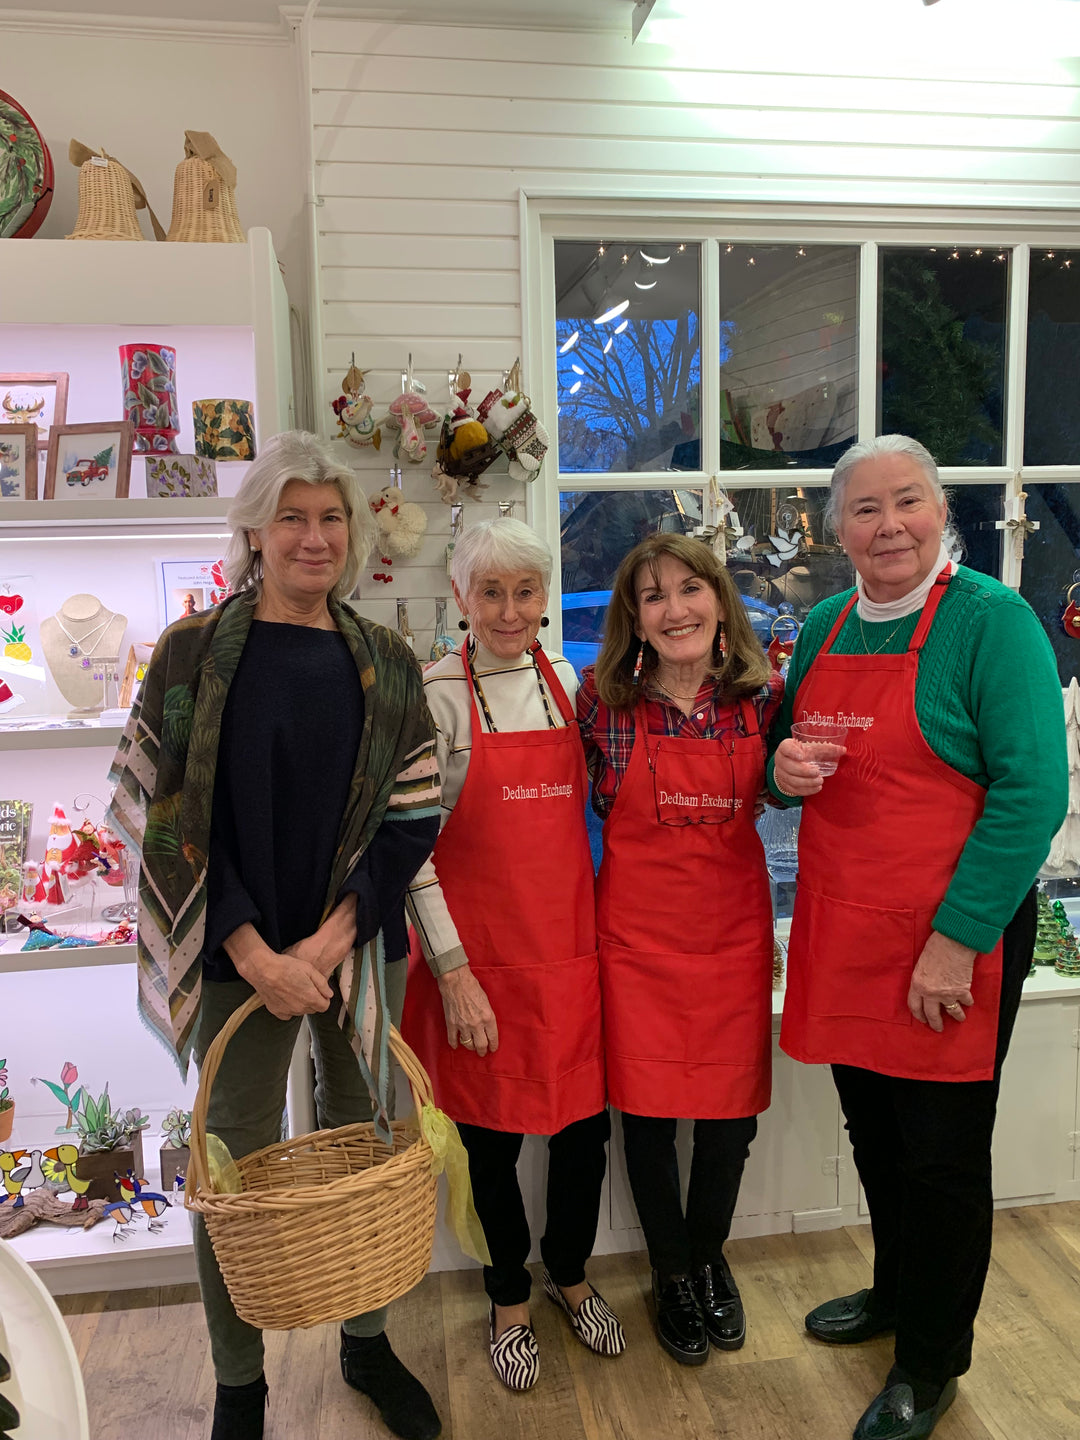 Oh what fun! A fabulous private shopping event with Noanett Garden Club